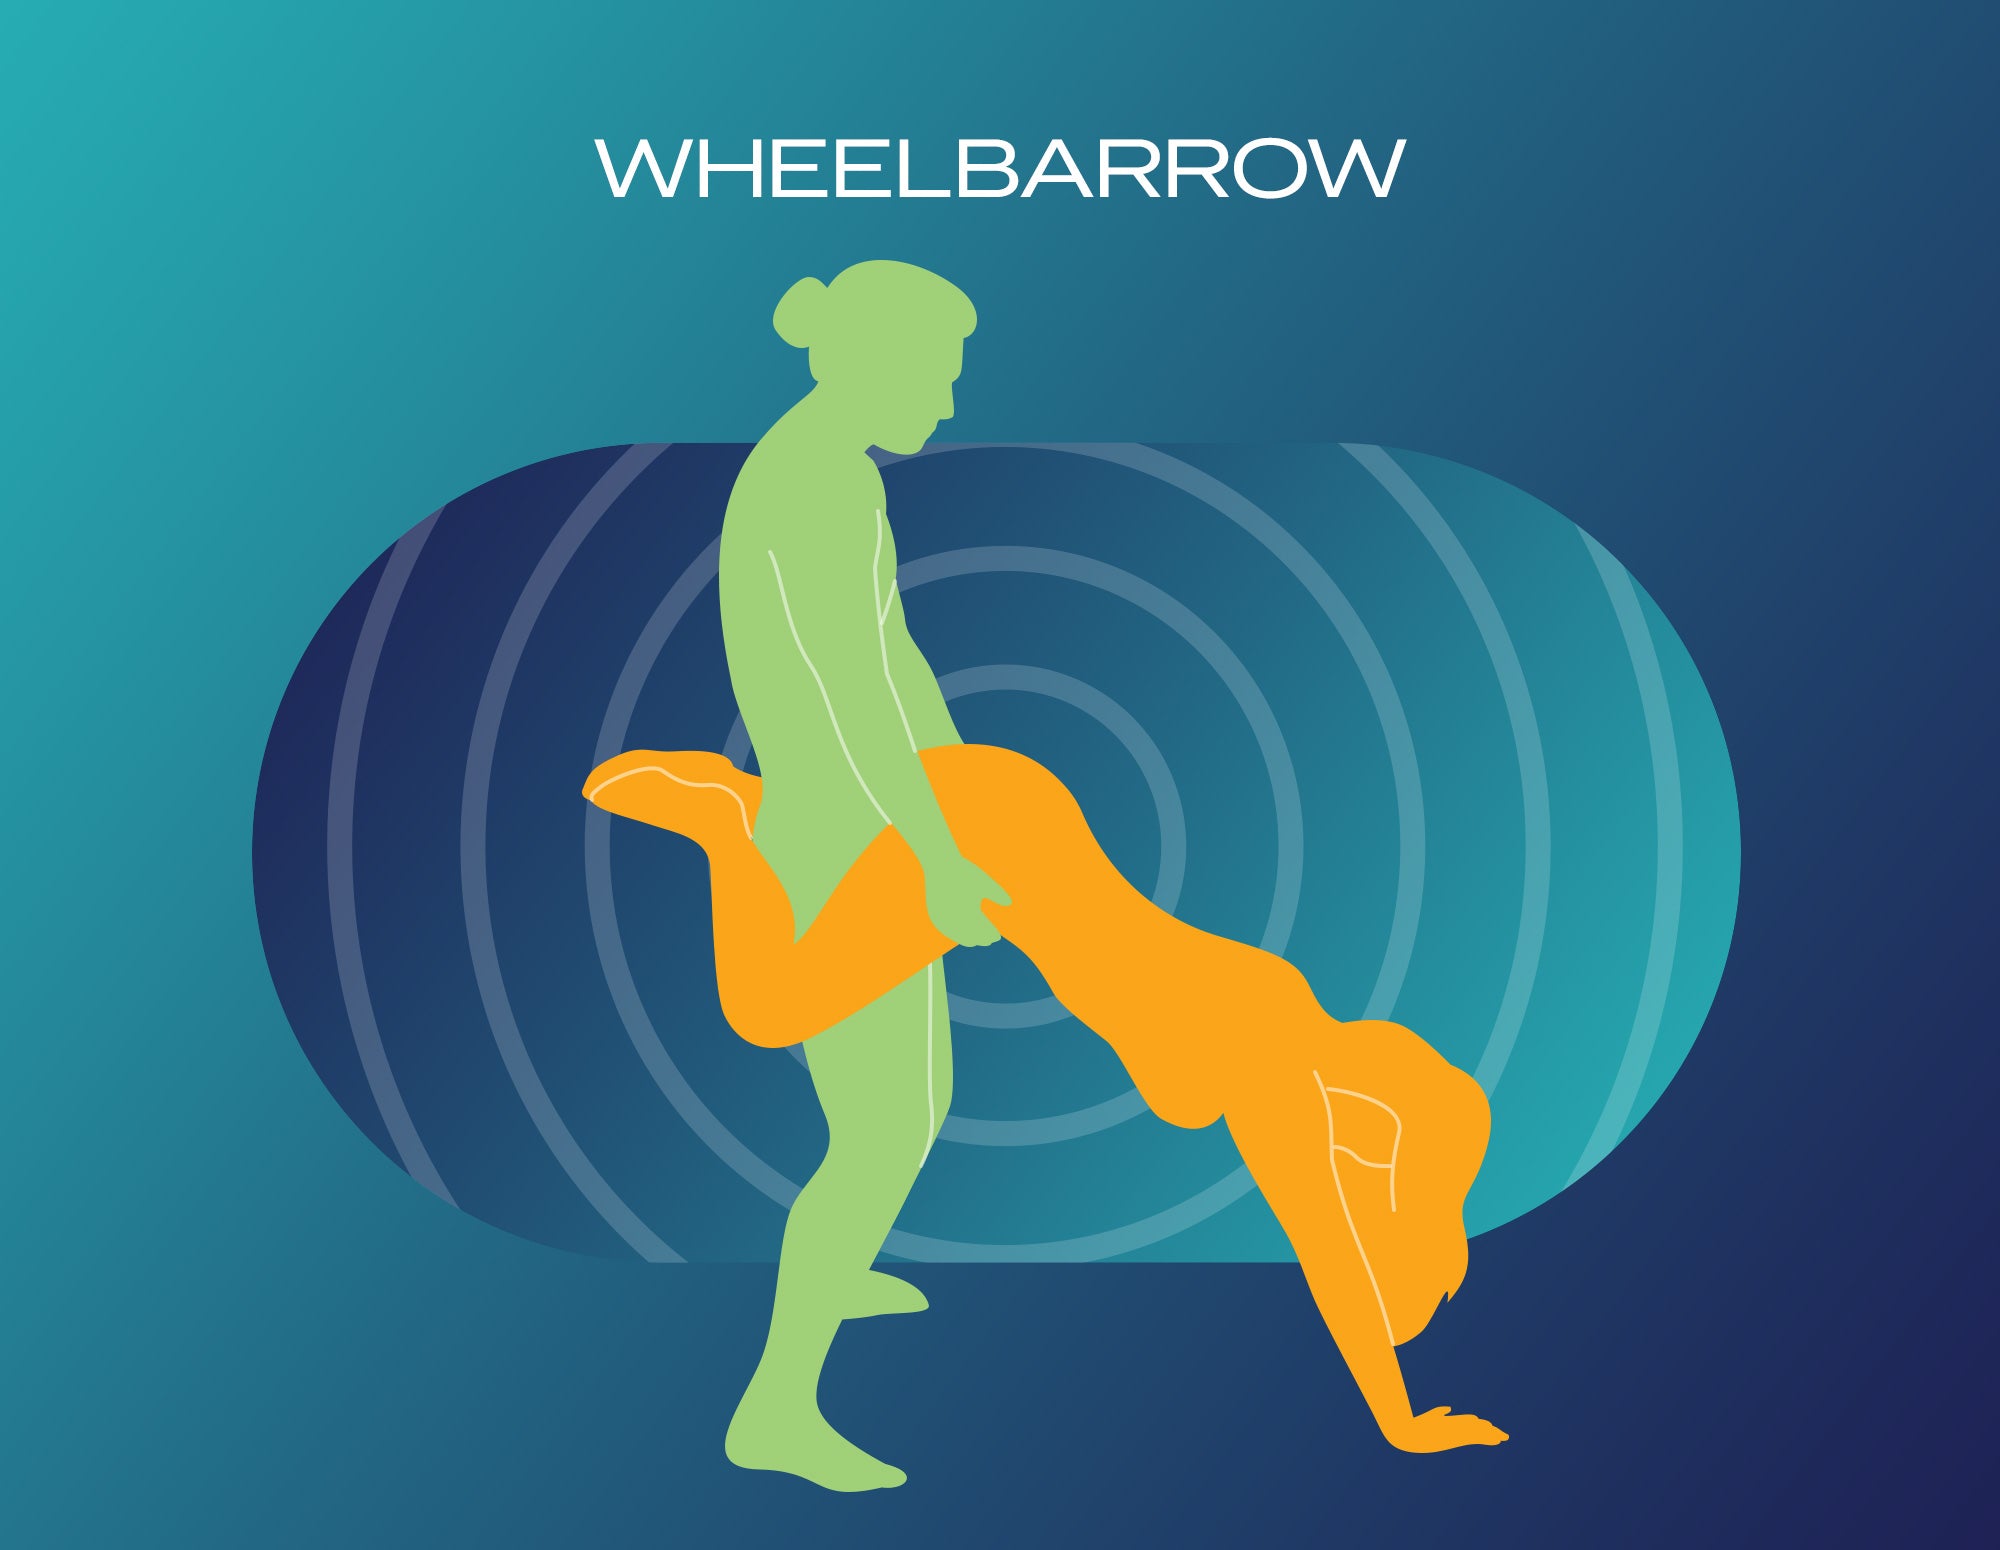 Wheelbarrow sex position illustration of man and woman with teal background.